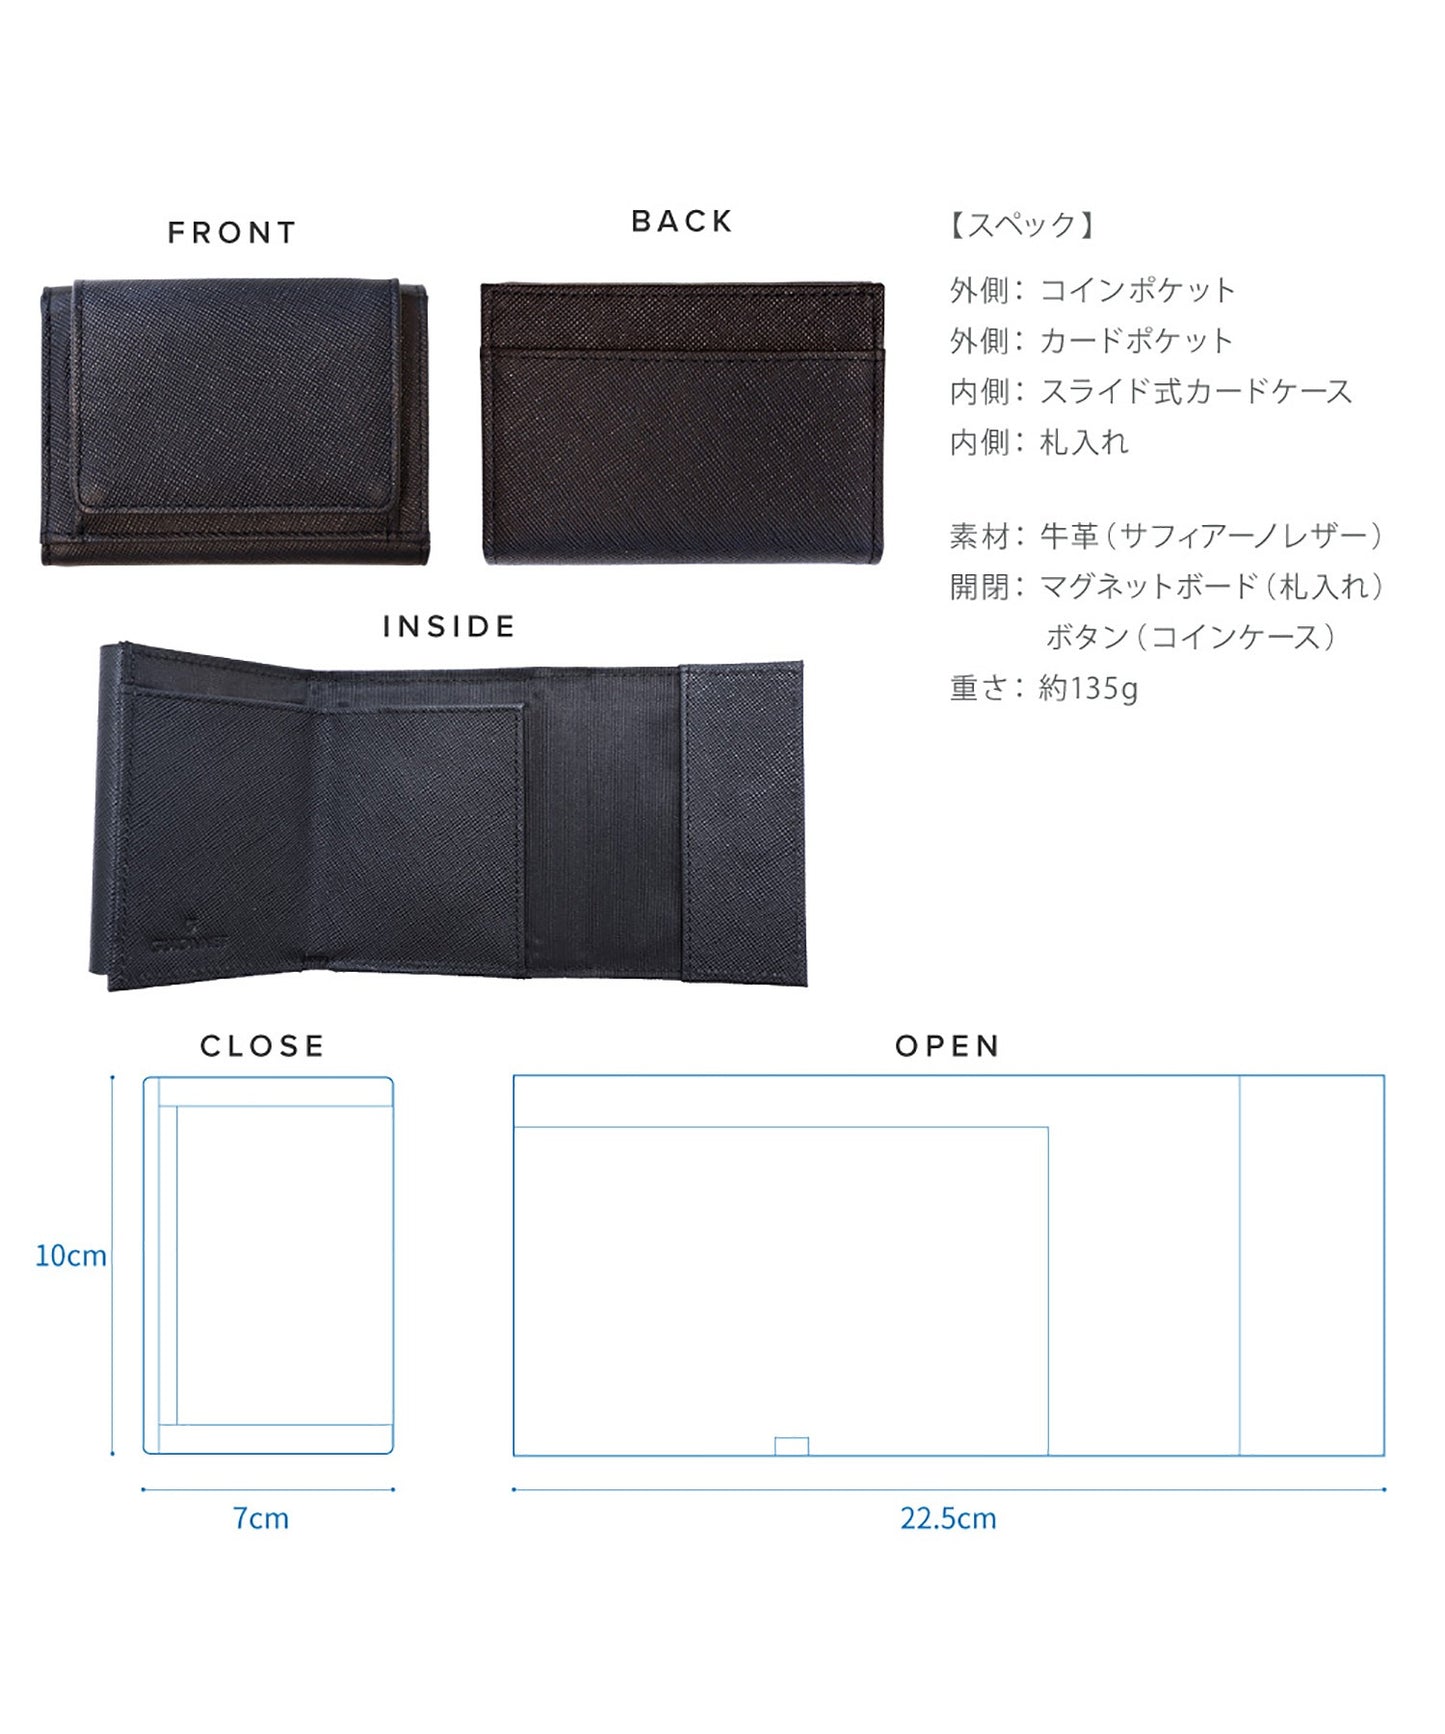 Saffiano leather trifold wallet PG401